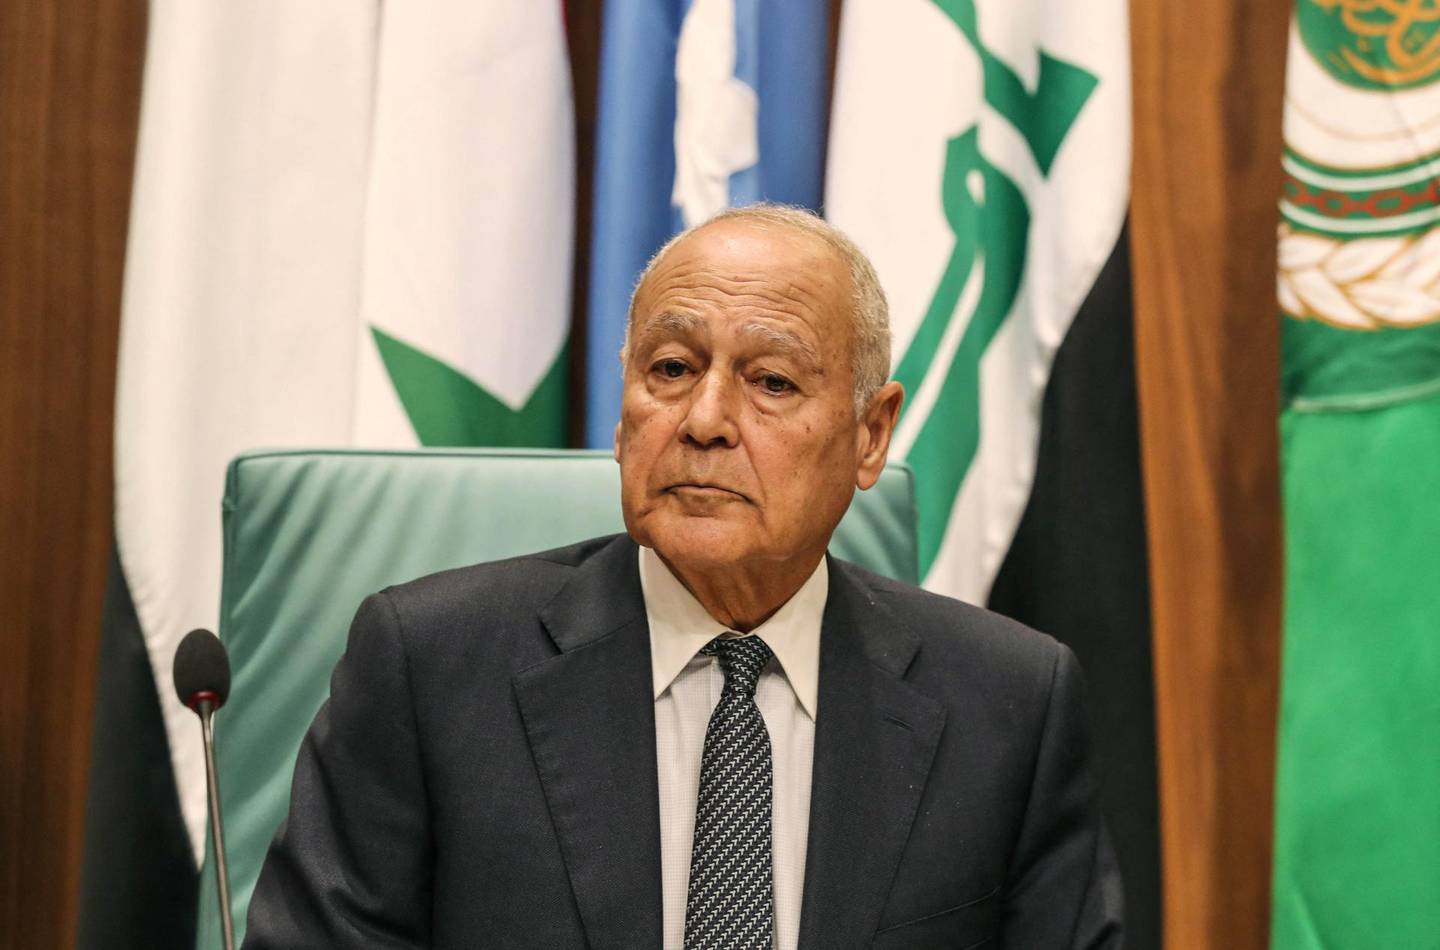 Secretary-General of the Arab League Ahmed Aboul Gheit chairs the Arab Foreign Ministers 153rd annual meeting at the Arab League headquarters in the Egyptian capital Cairo on March 4, 2020. (Photo by Mohamed el-Shahed / AFP)